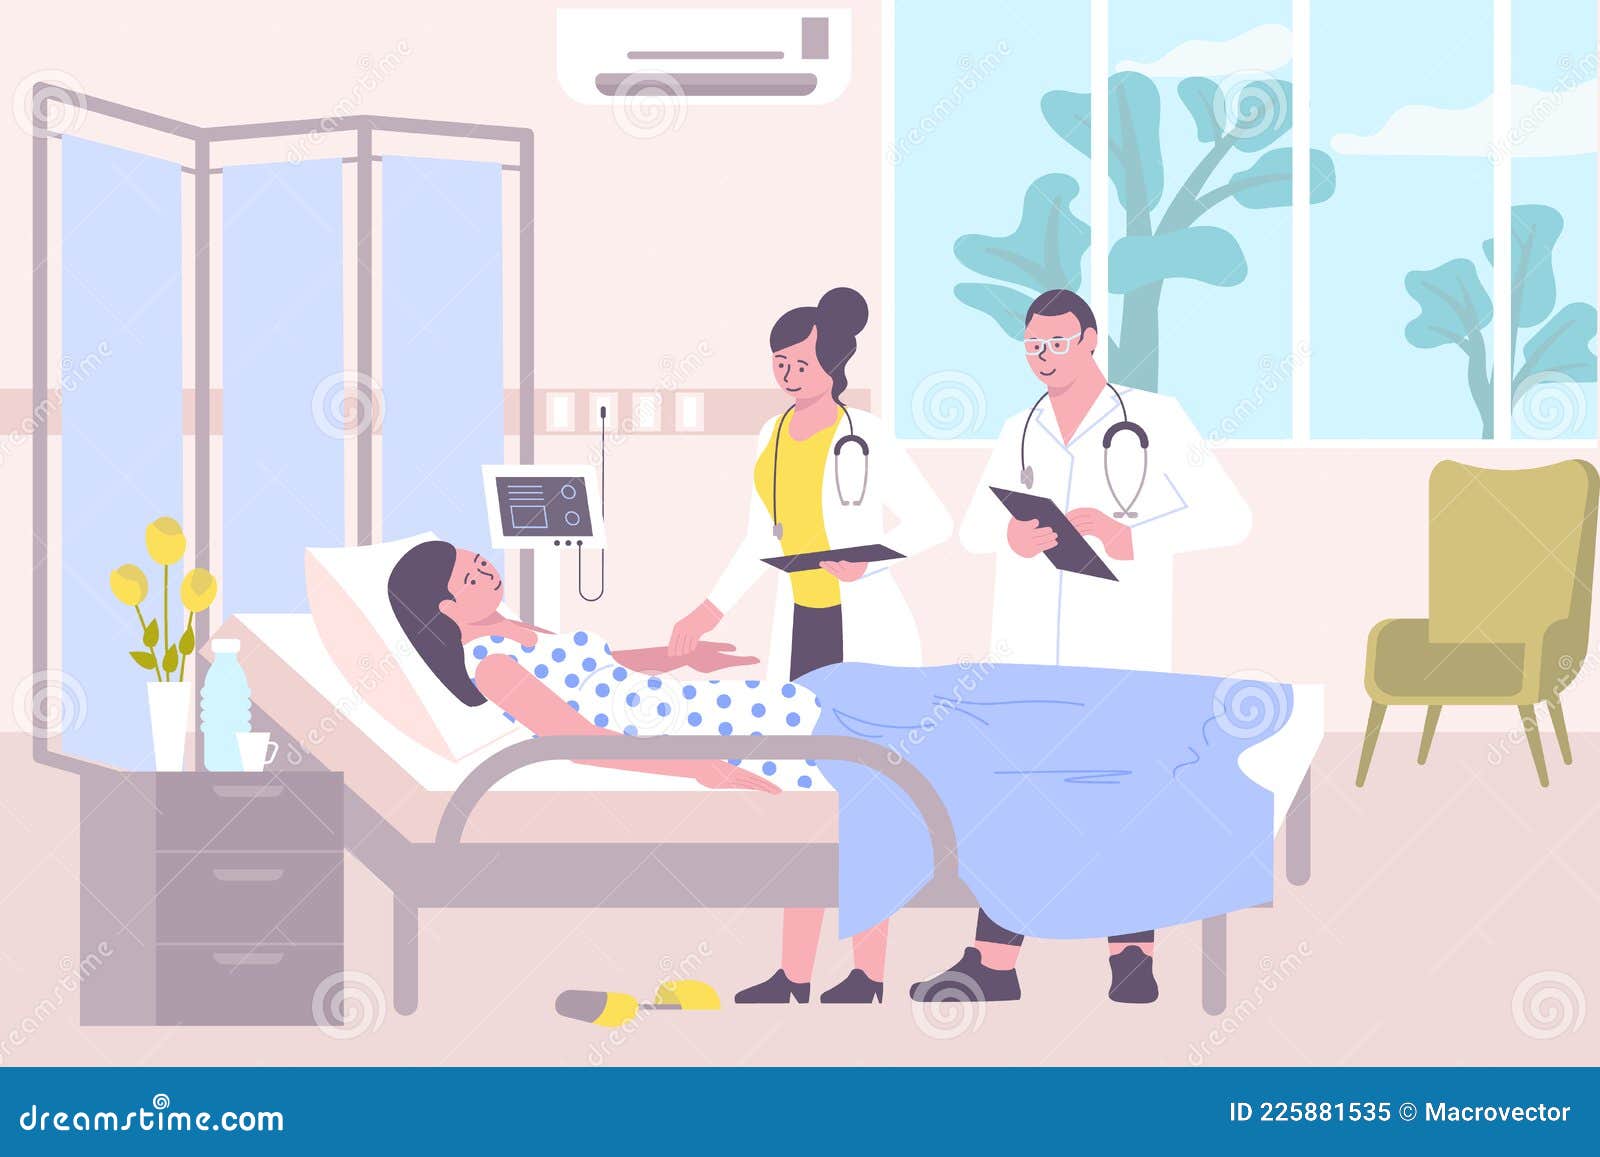 Hospital Ward Doctor Composition Stock Vector - Illustration of therapy ...